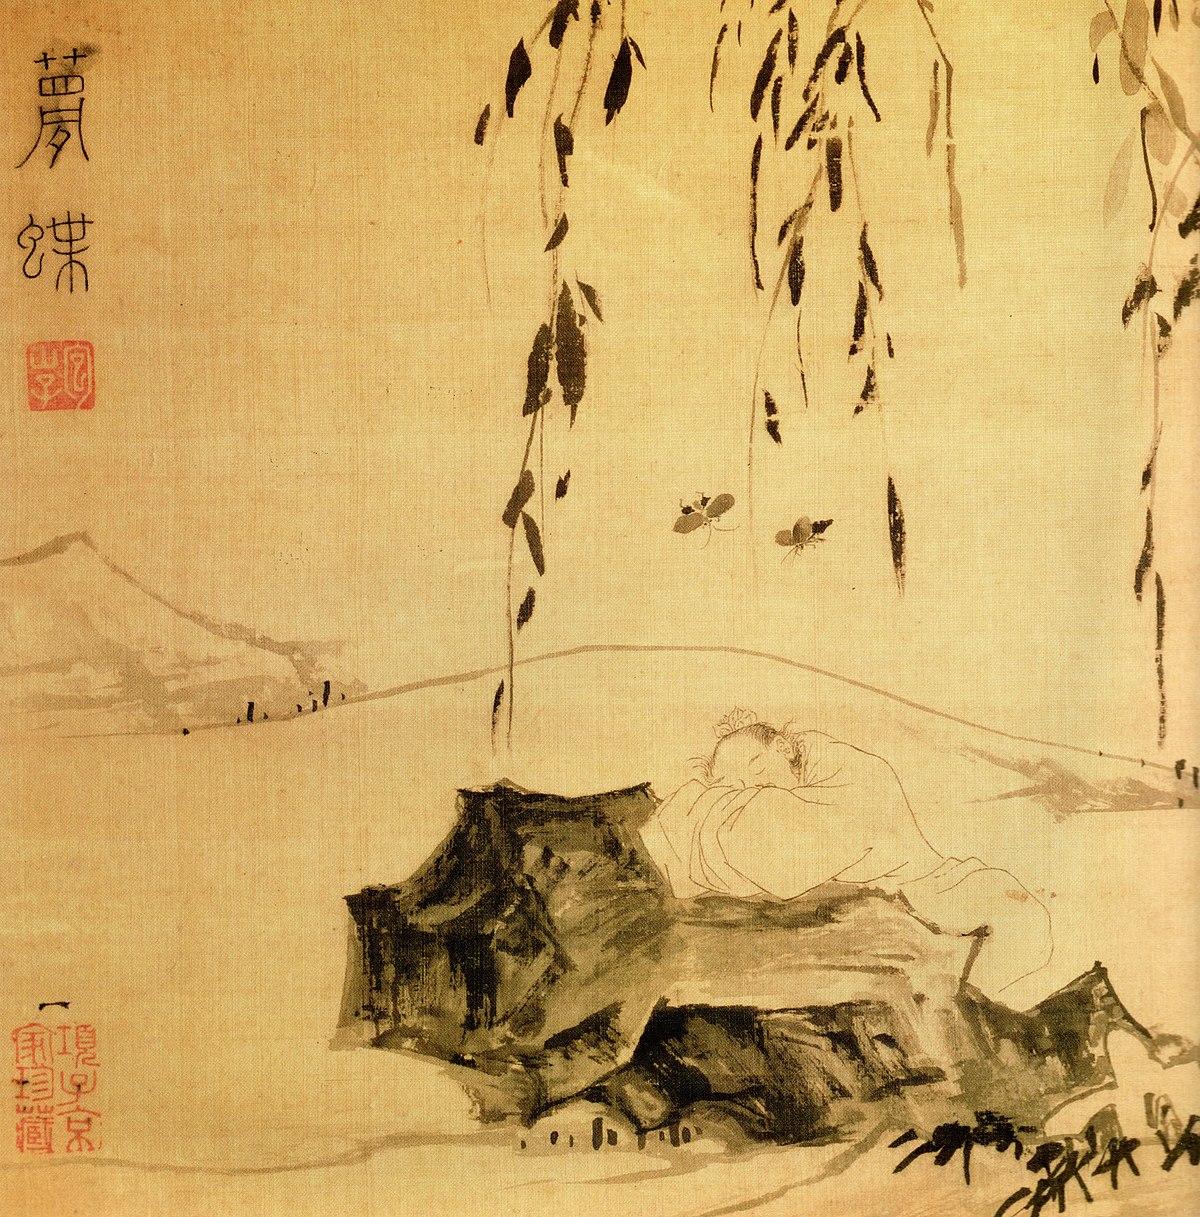 The Butterfly Dream, by Chinese painter Lu Zhi. Ideograms and forms printed or drawn on aged parchment in black and red.